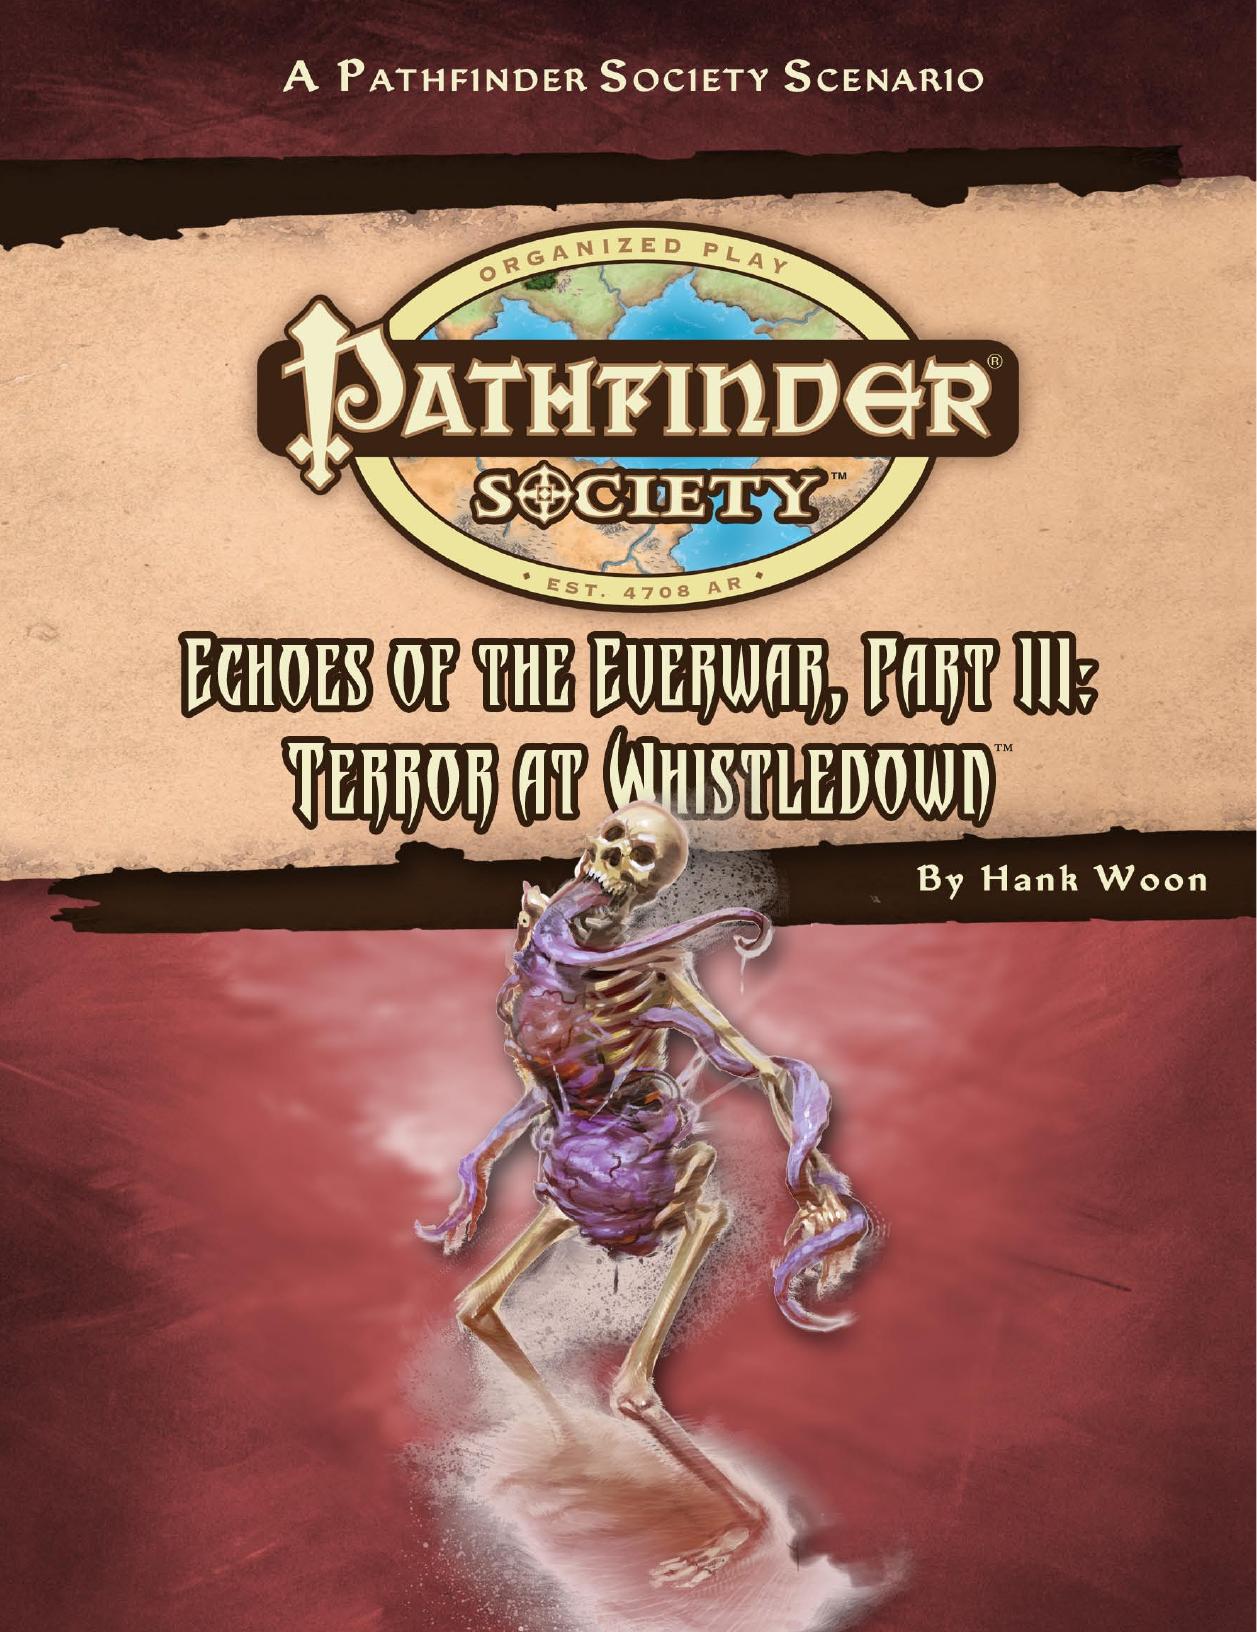 Pathfinder Society: Echoes of the Everwar III, Terror at Whistledown